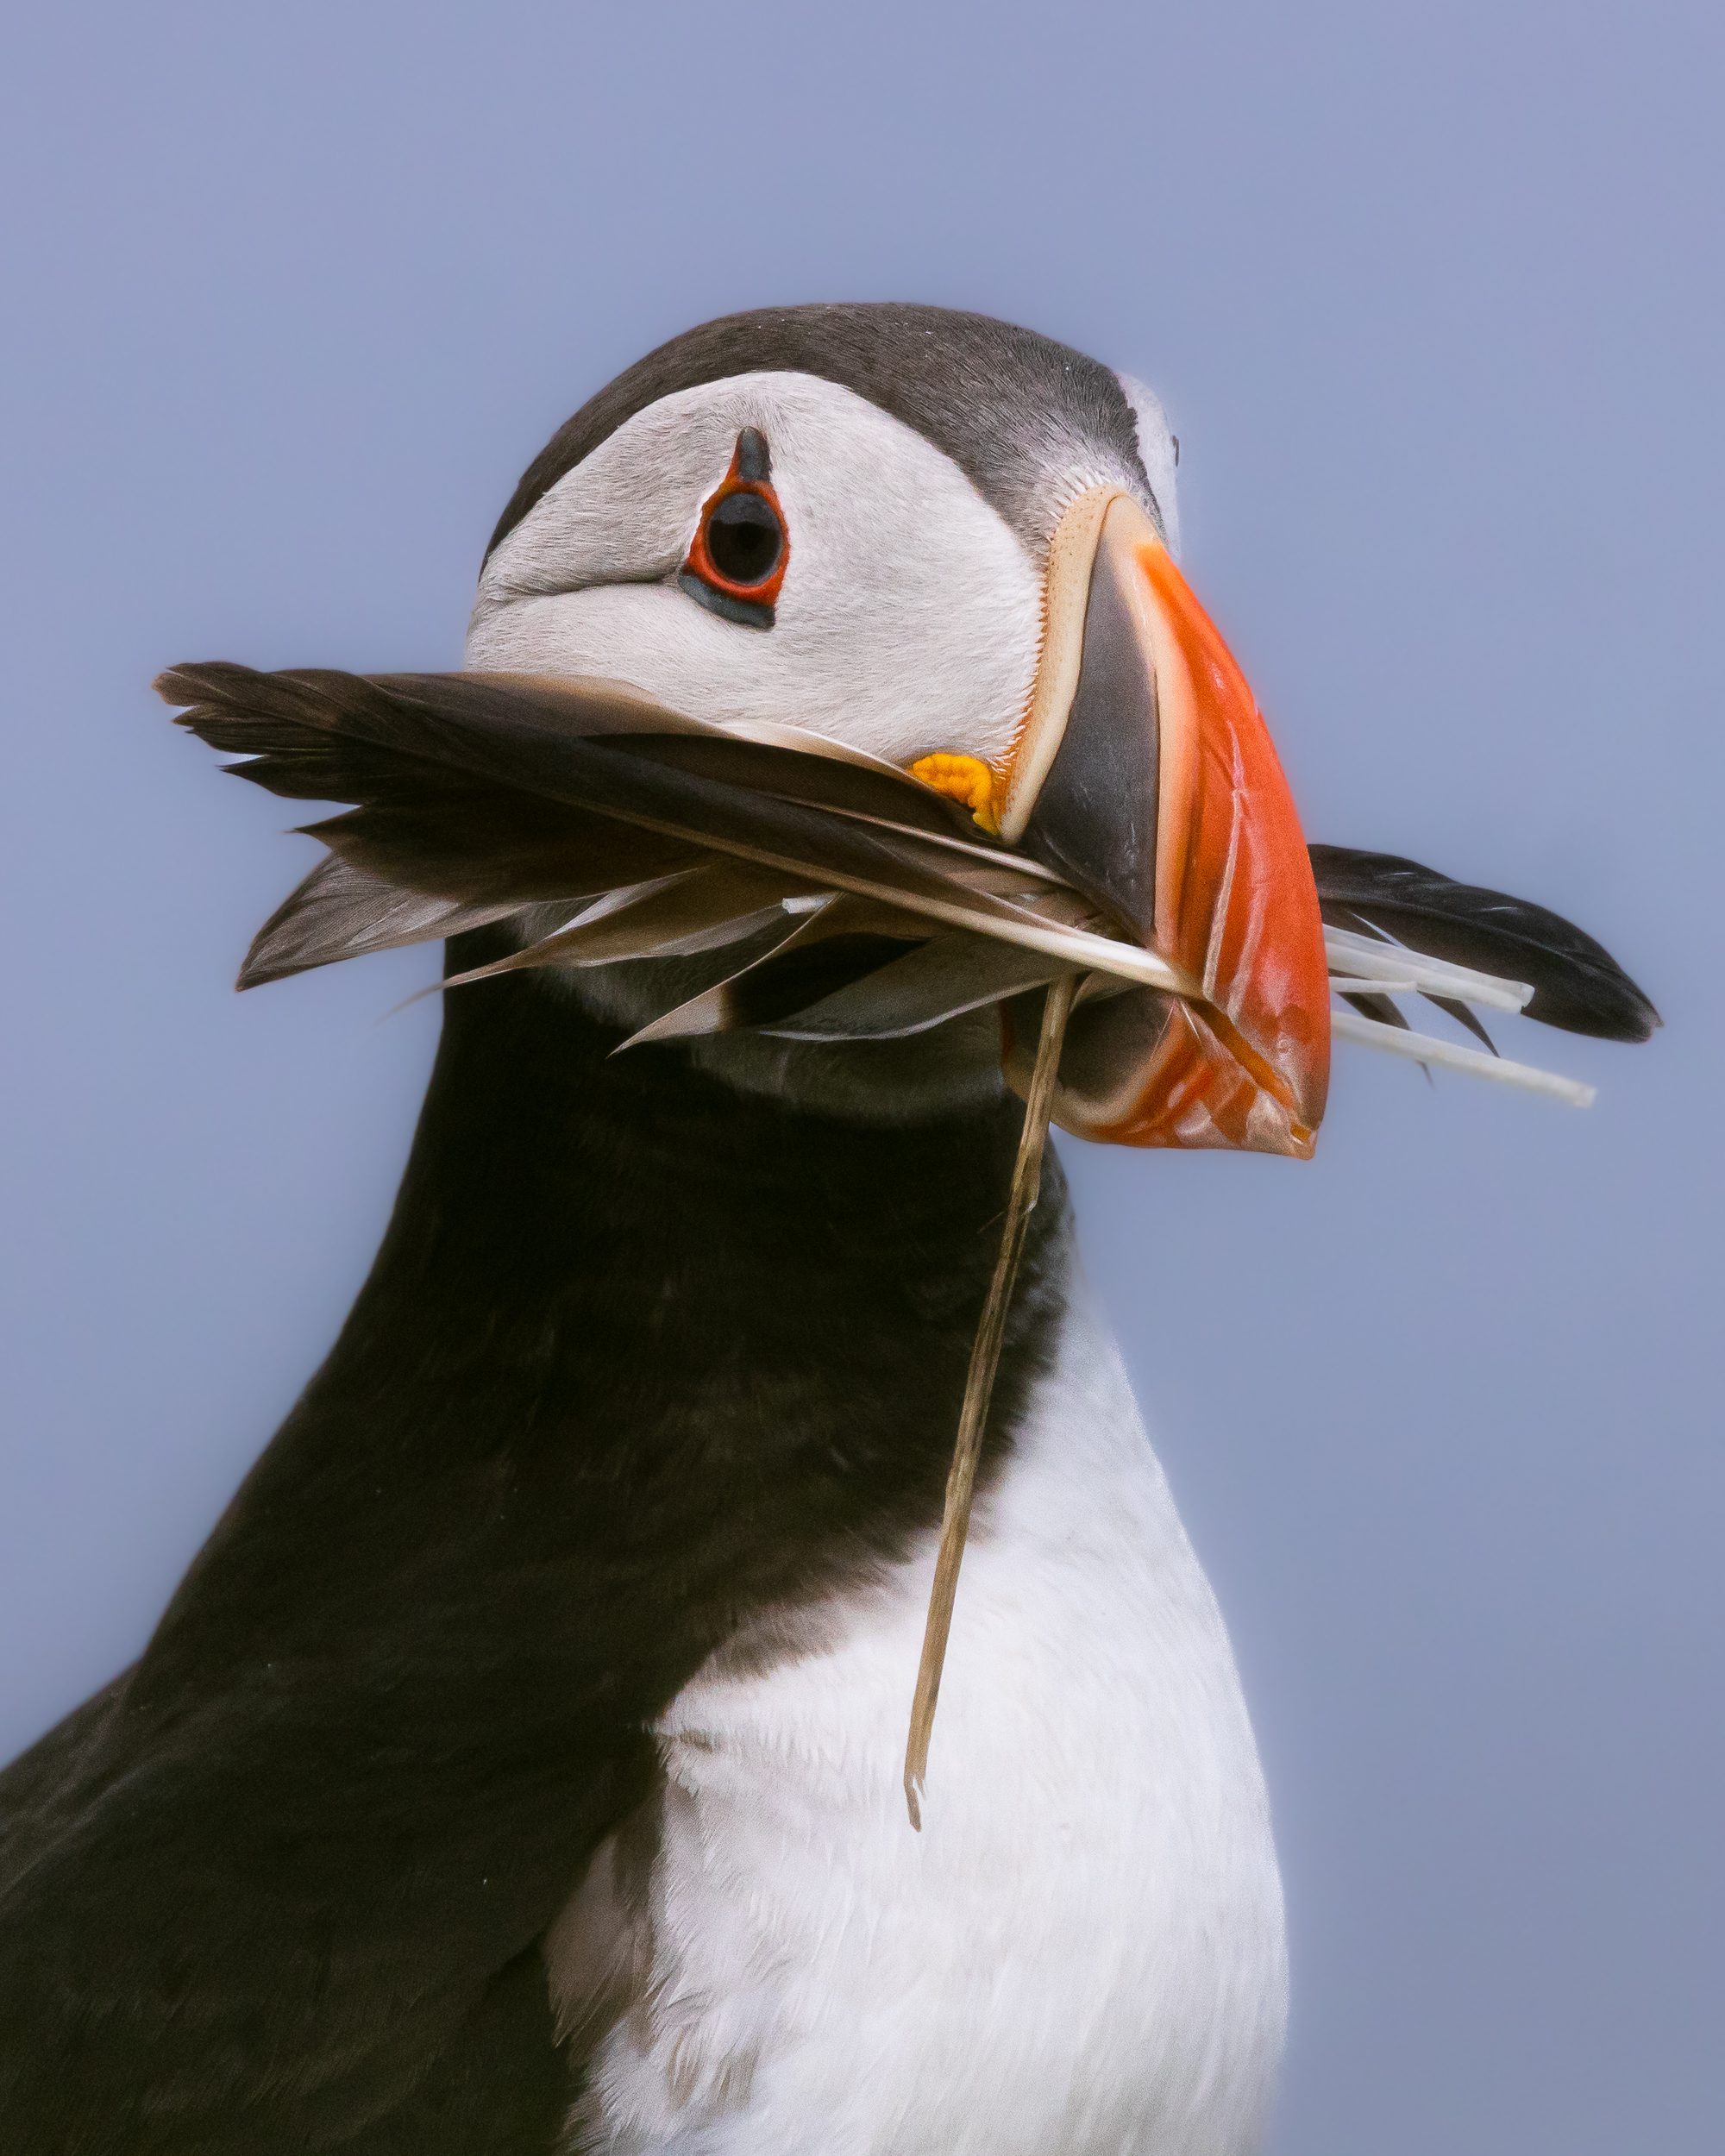 Puffin holding feathers